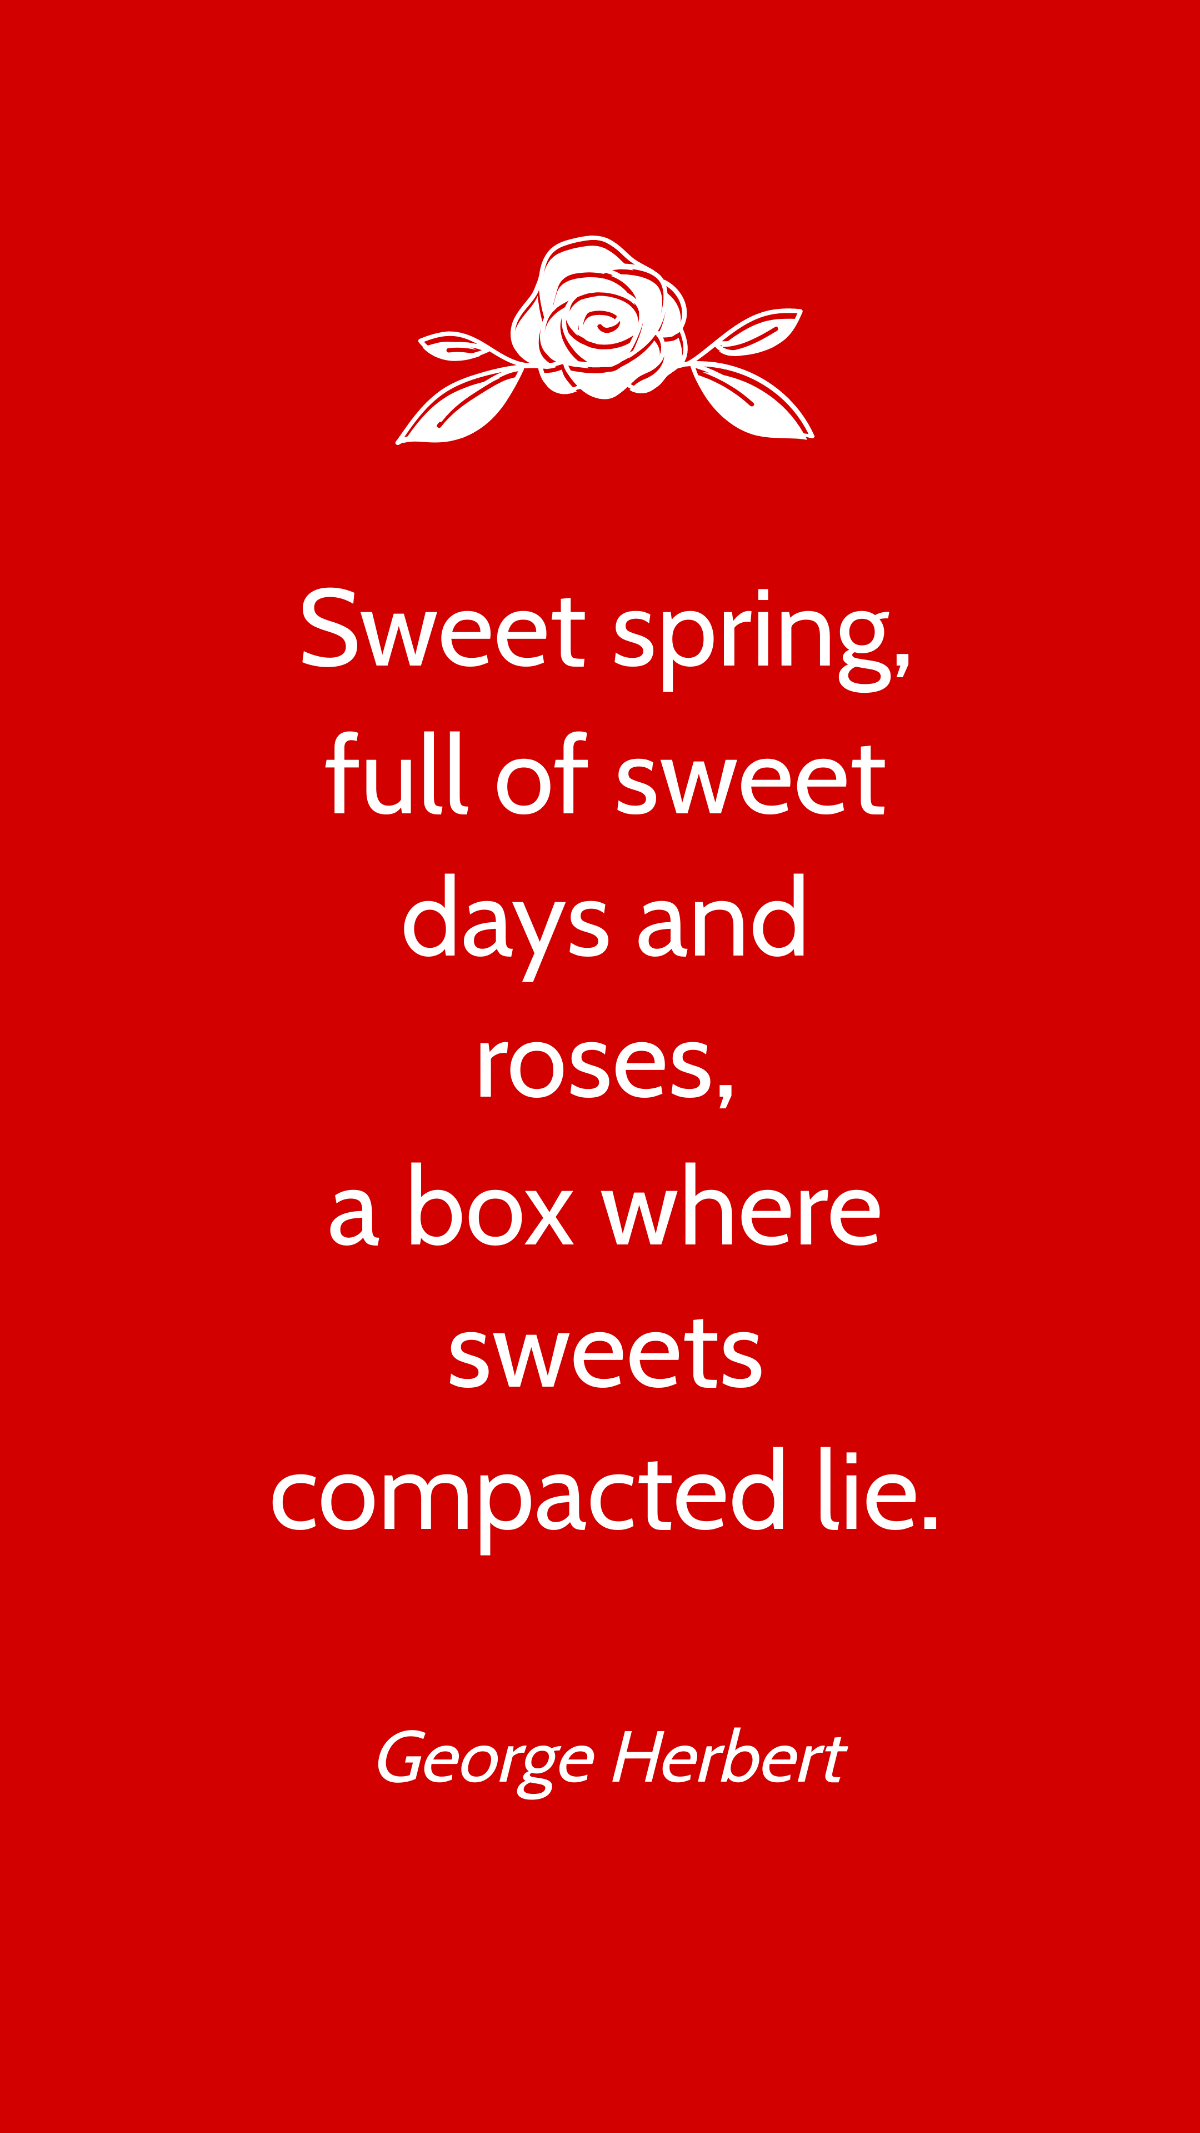 George Herbert - Sweet spring, full of sweet days and roses, a box where sweets compacted lie.